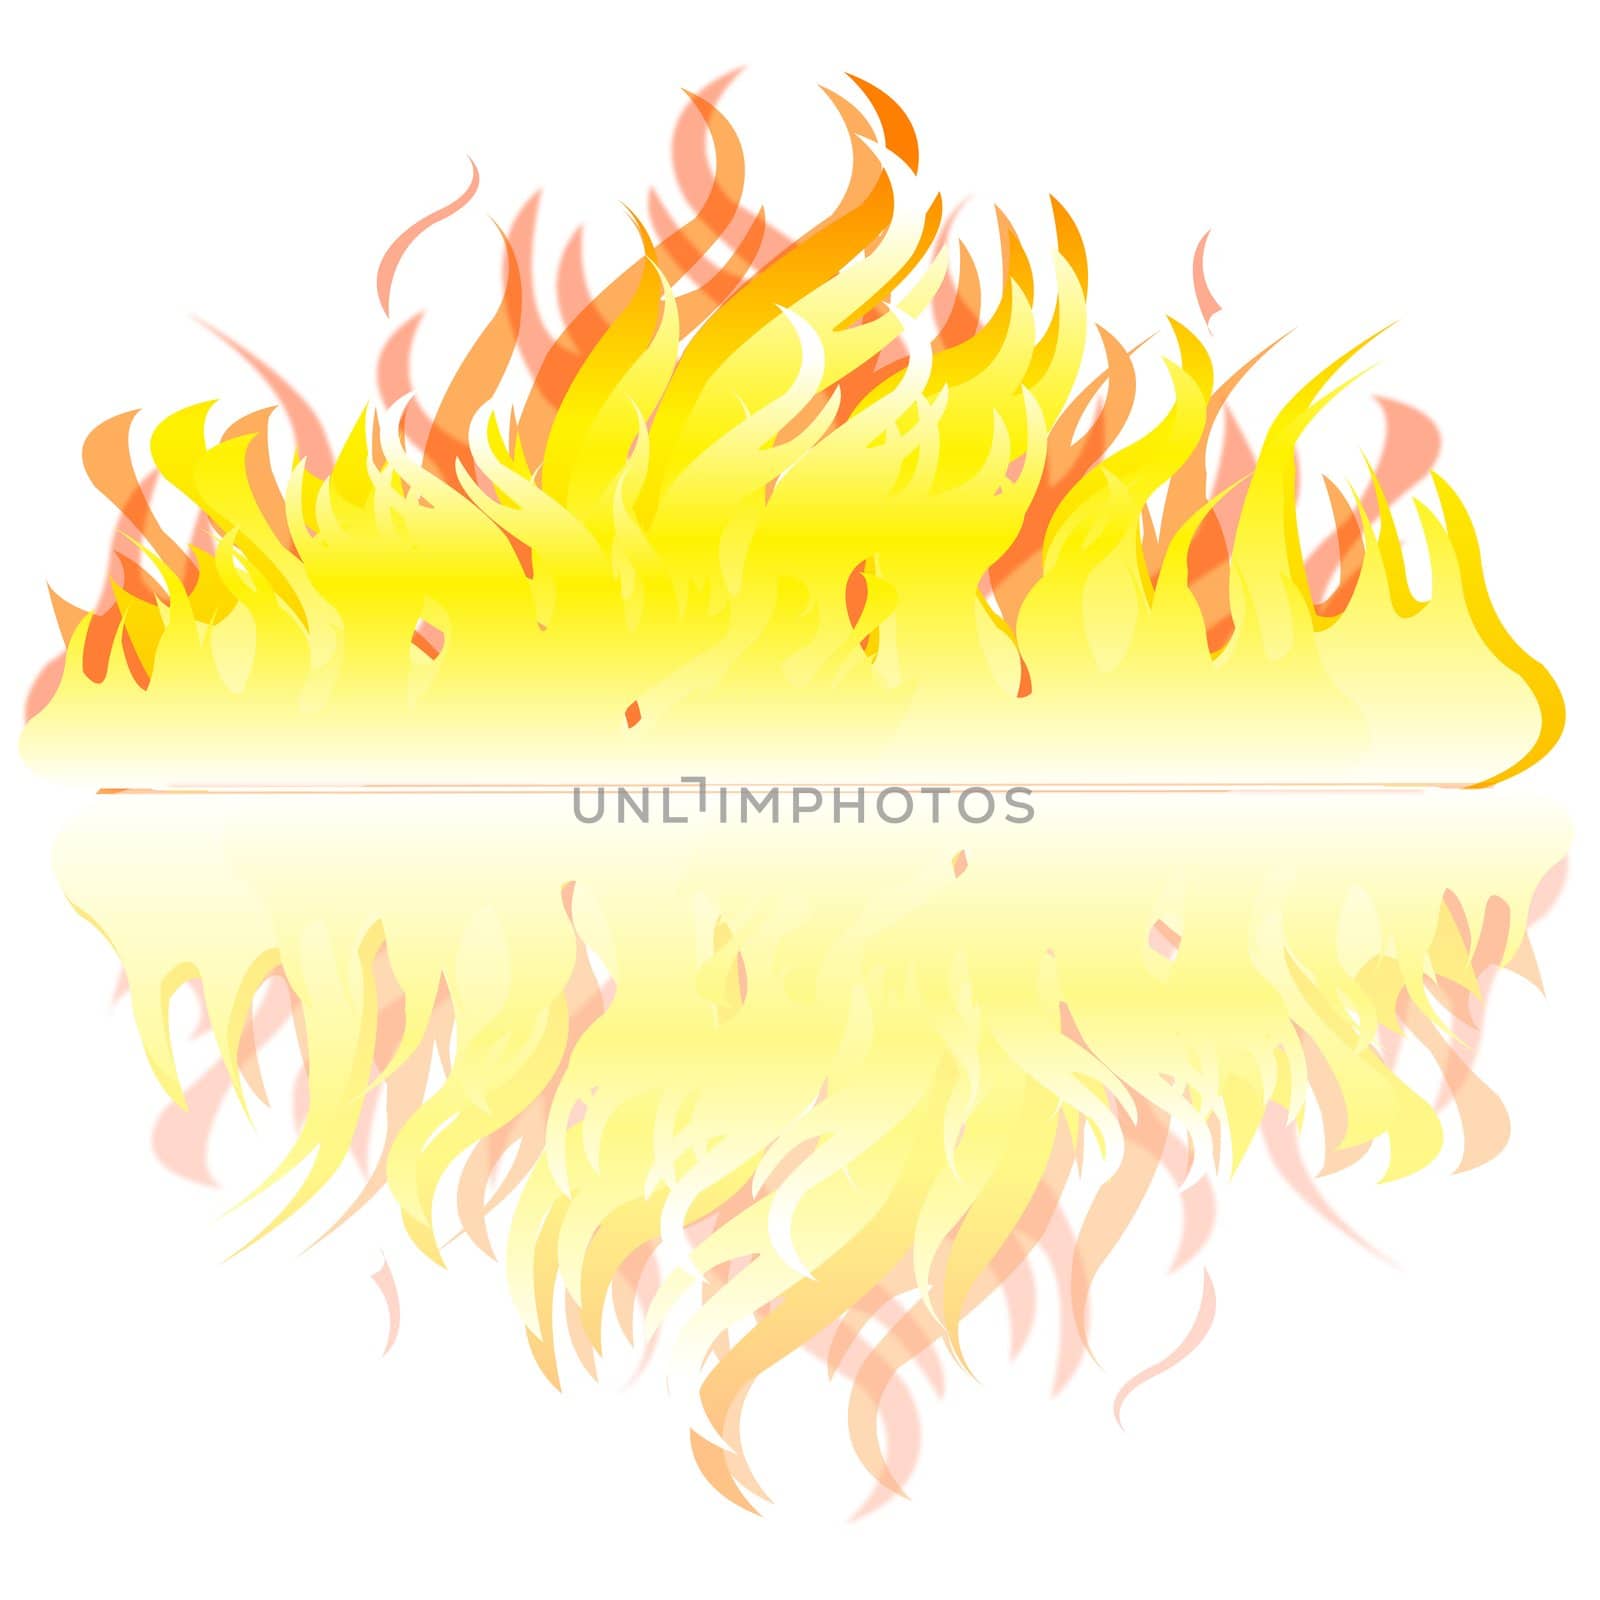 Flame on white background by cobol1964